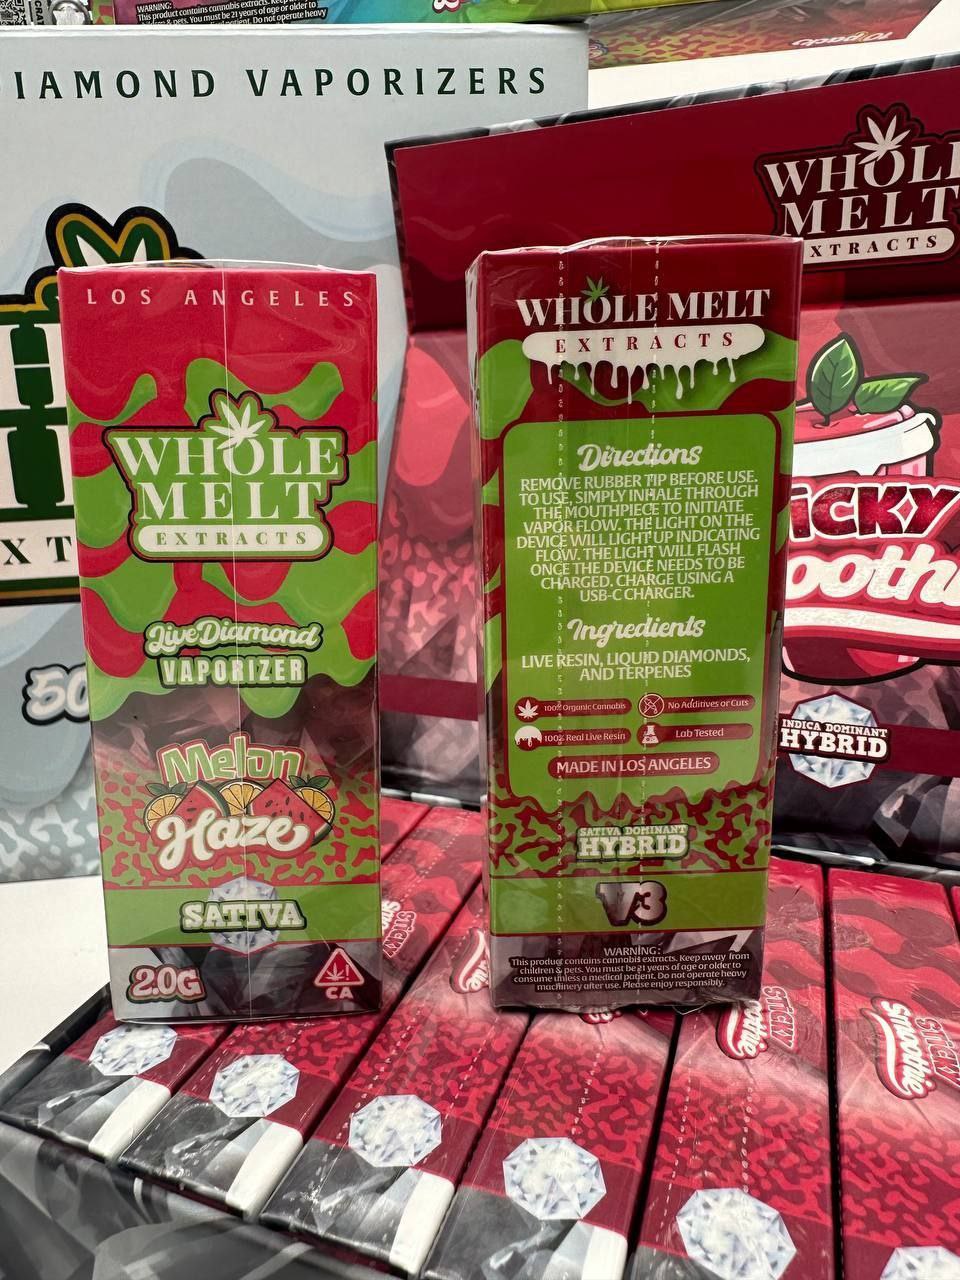 Boxes of Import placeholder for 37 vaping products are displayed. One box reads "Melon Haze" and features green and red cannabis imagery. The back of the box includes directions and ingredients, highlighting THC content and its sativa classification.